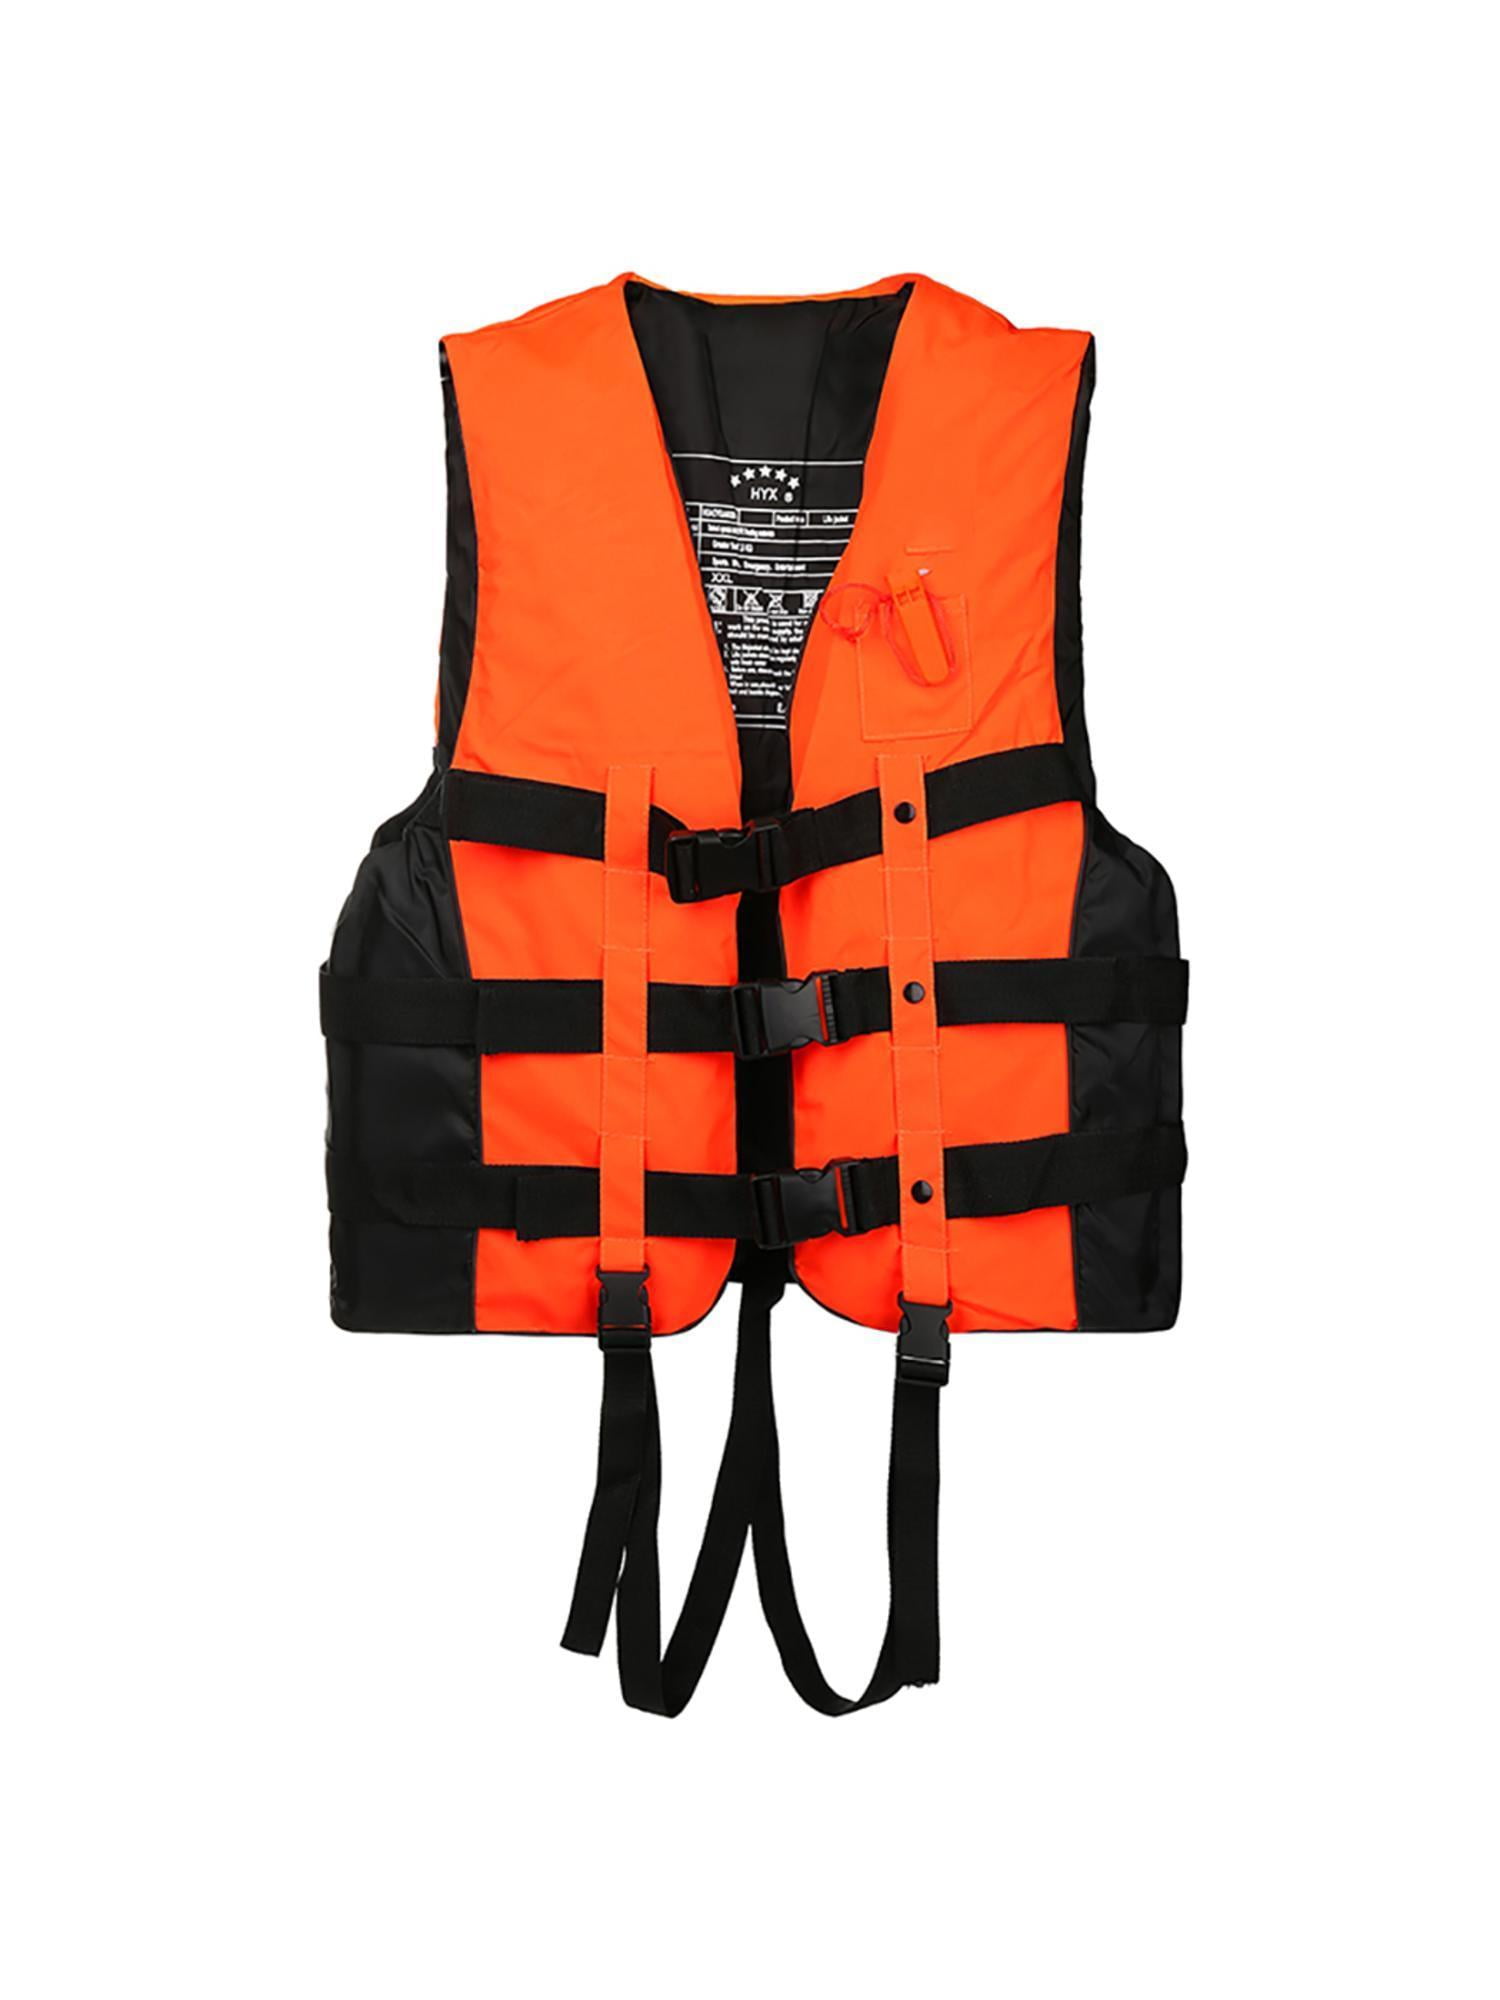 Reusable Adult Life Vest Life Jacket Pool Beach Swimming Water Sports ...